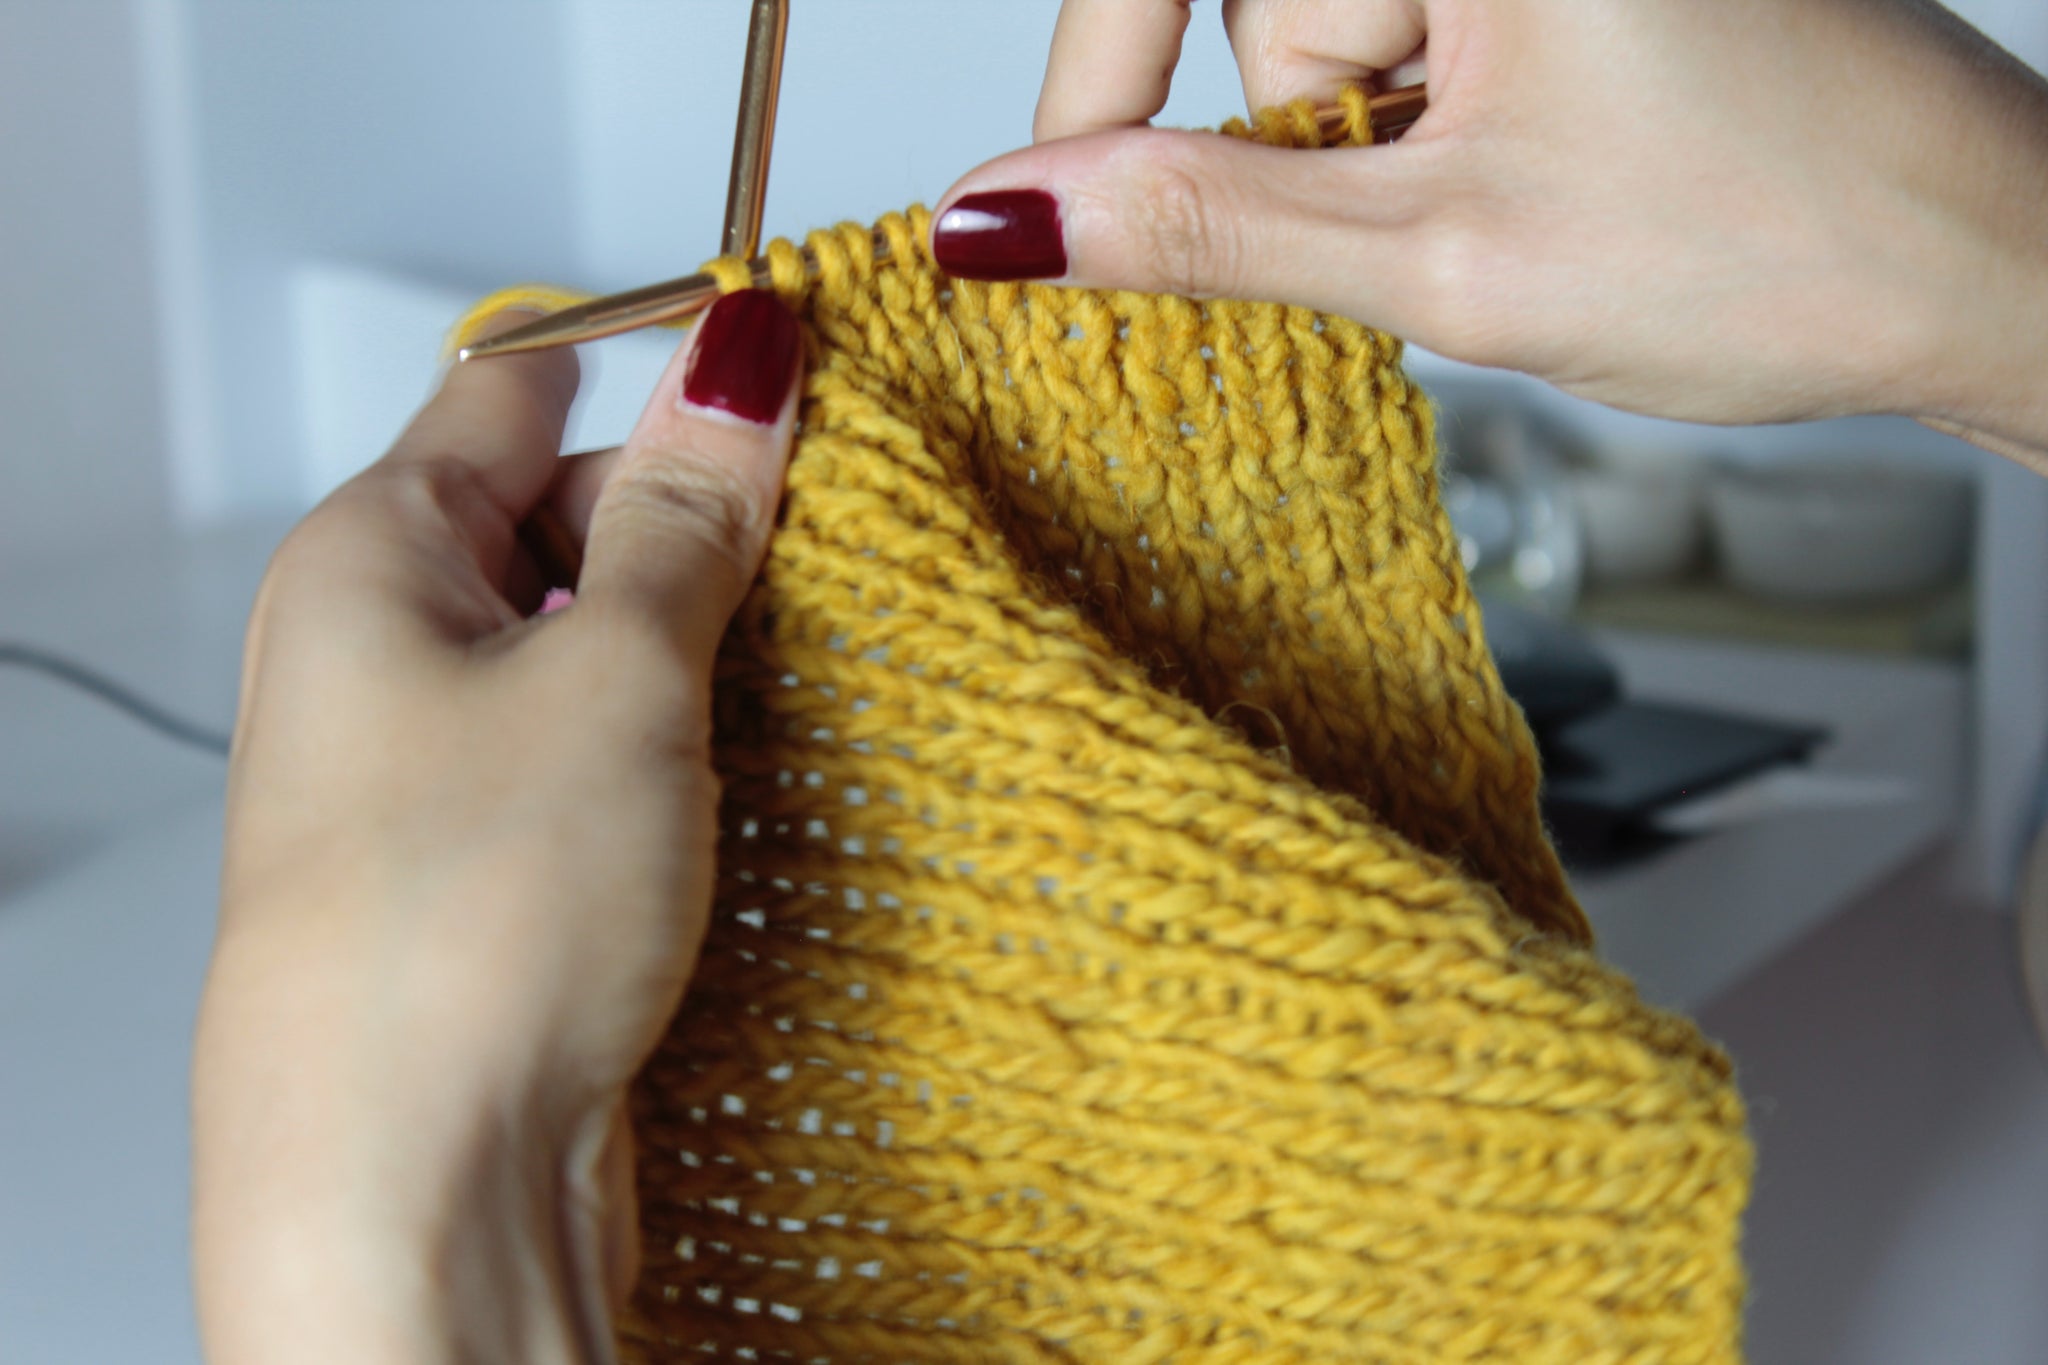 LEARN TO KNIT AT KnittyGrittyYarnGirl